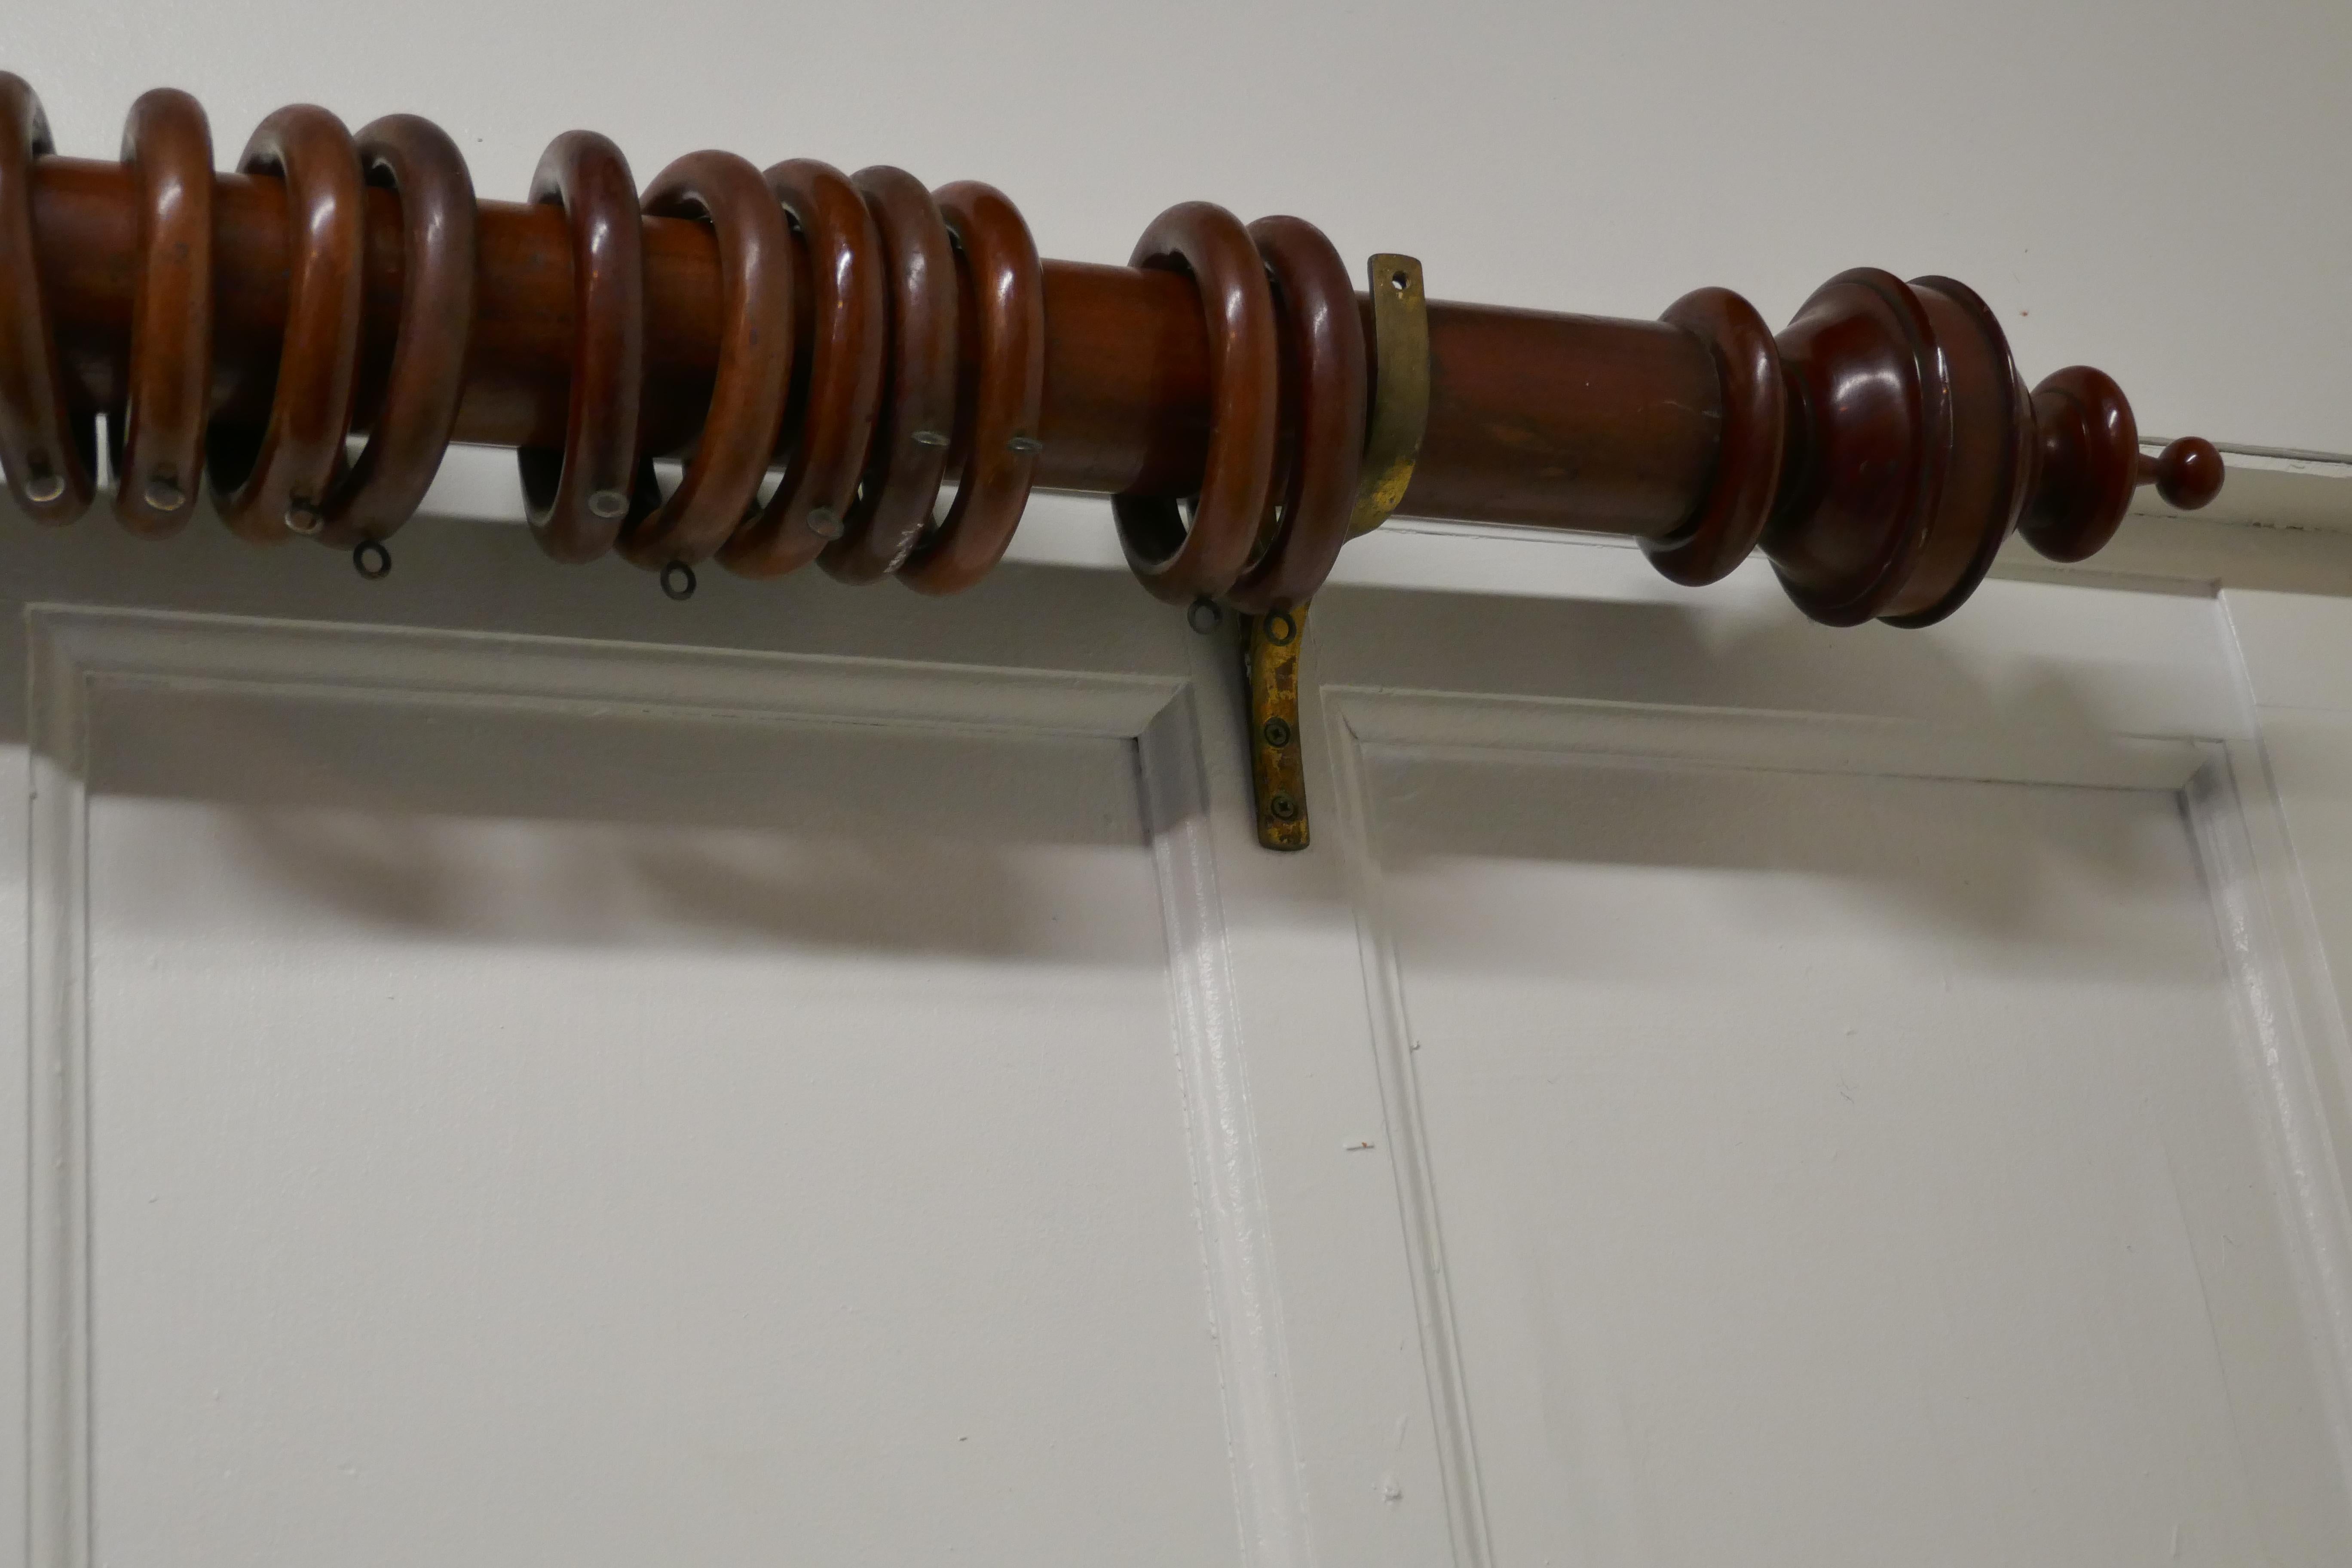 A very long Victorian mahogany curtain pole with rings.

This wonderful and very rare pole is turned from a single piece of mahogany the finished length is 12ft long
The curtain pole is over 3” in diameter, it is all made in mahogany with an